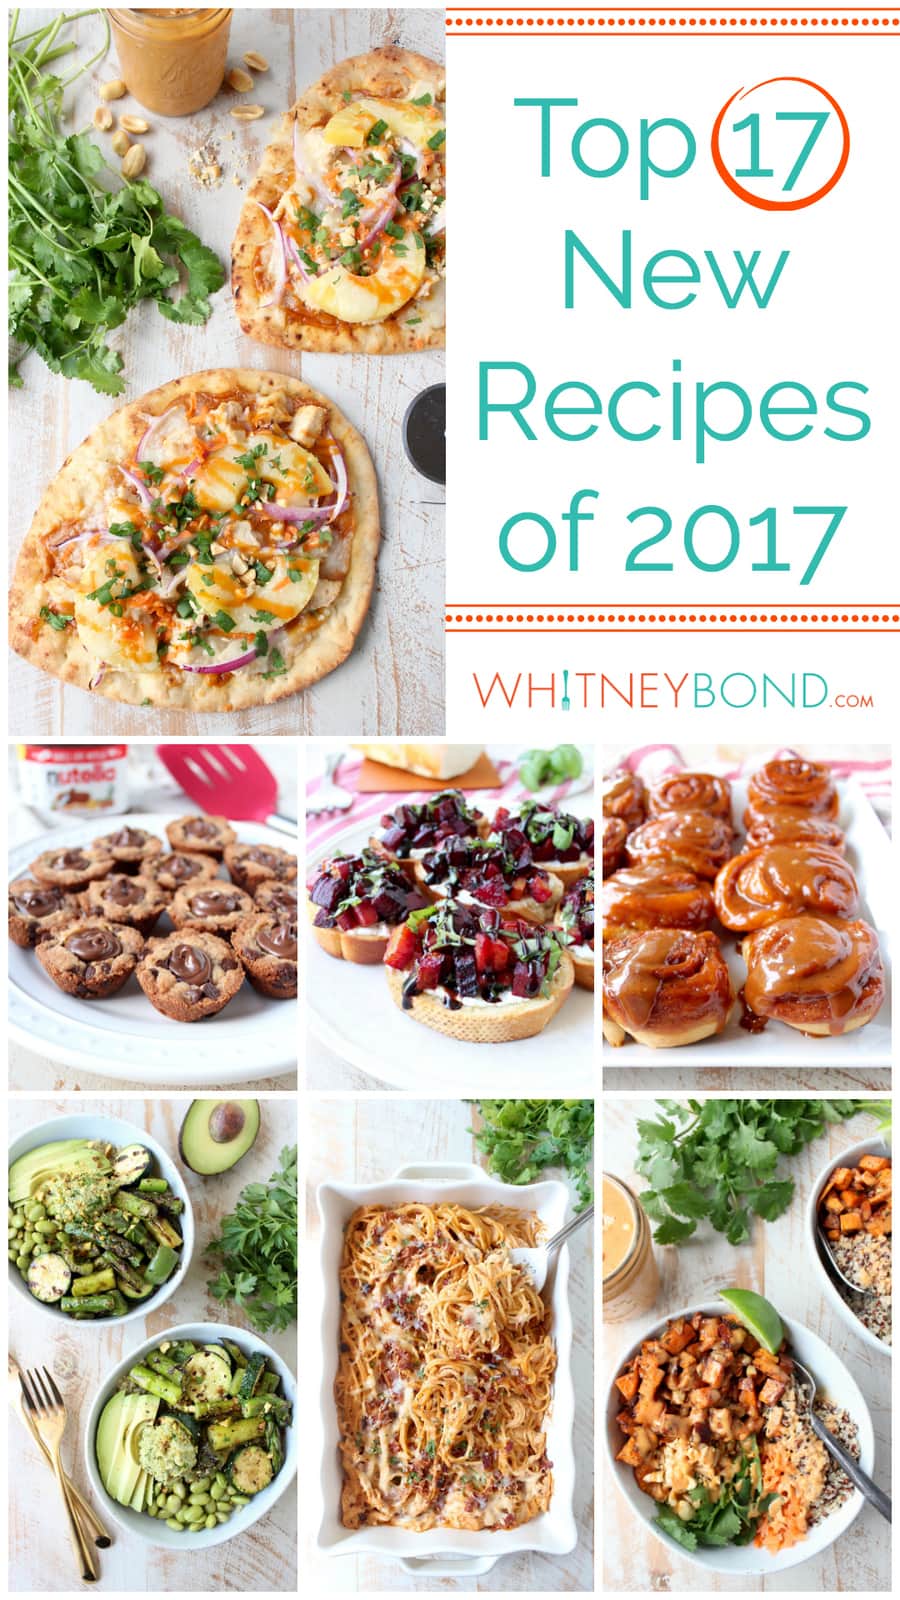 Top 17 delicious new recipes of 2017 on the food blog WhitneyBond.com, featuring buddha bowls, cinnamon rolls, tacos and pasta!